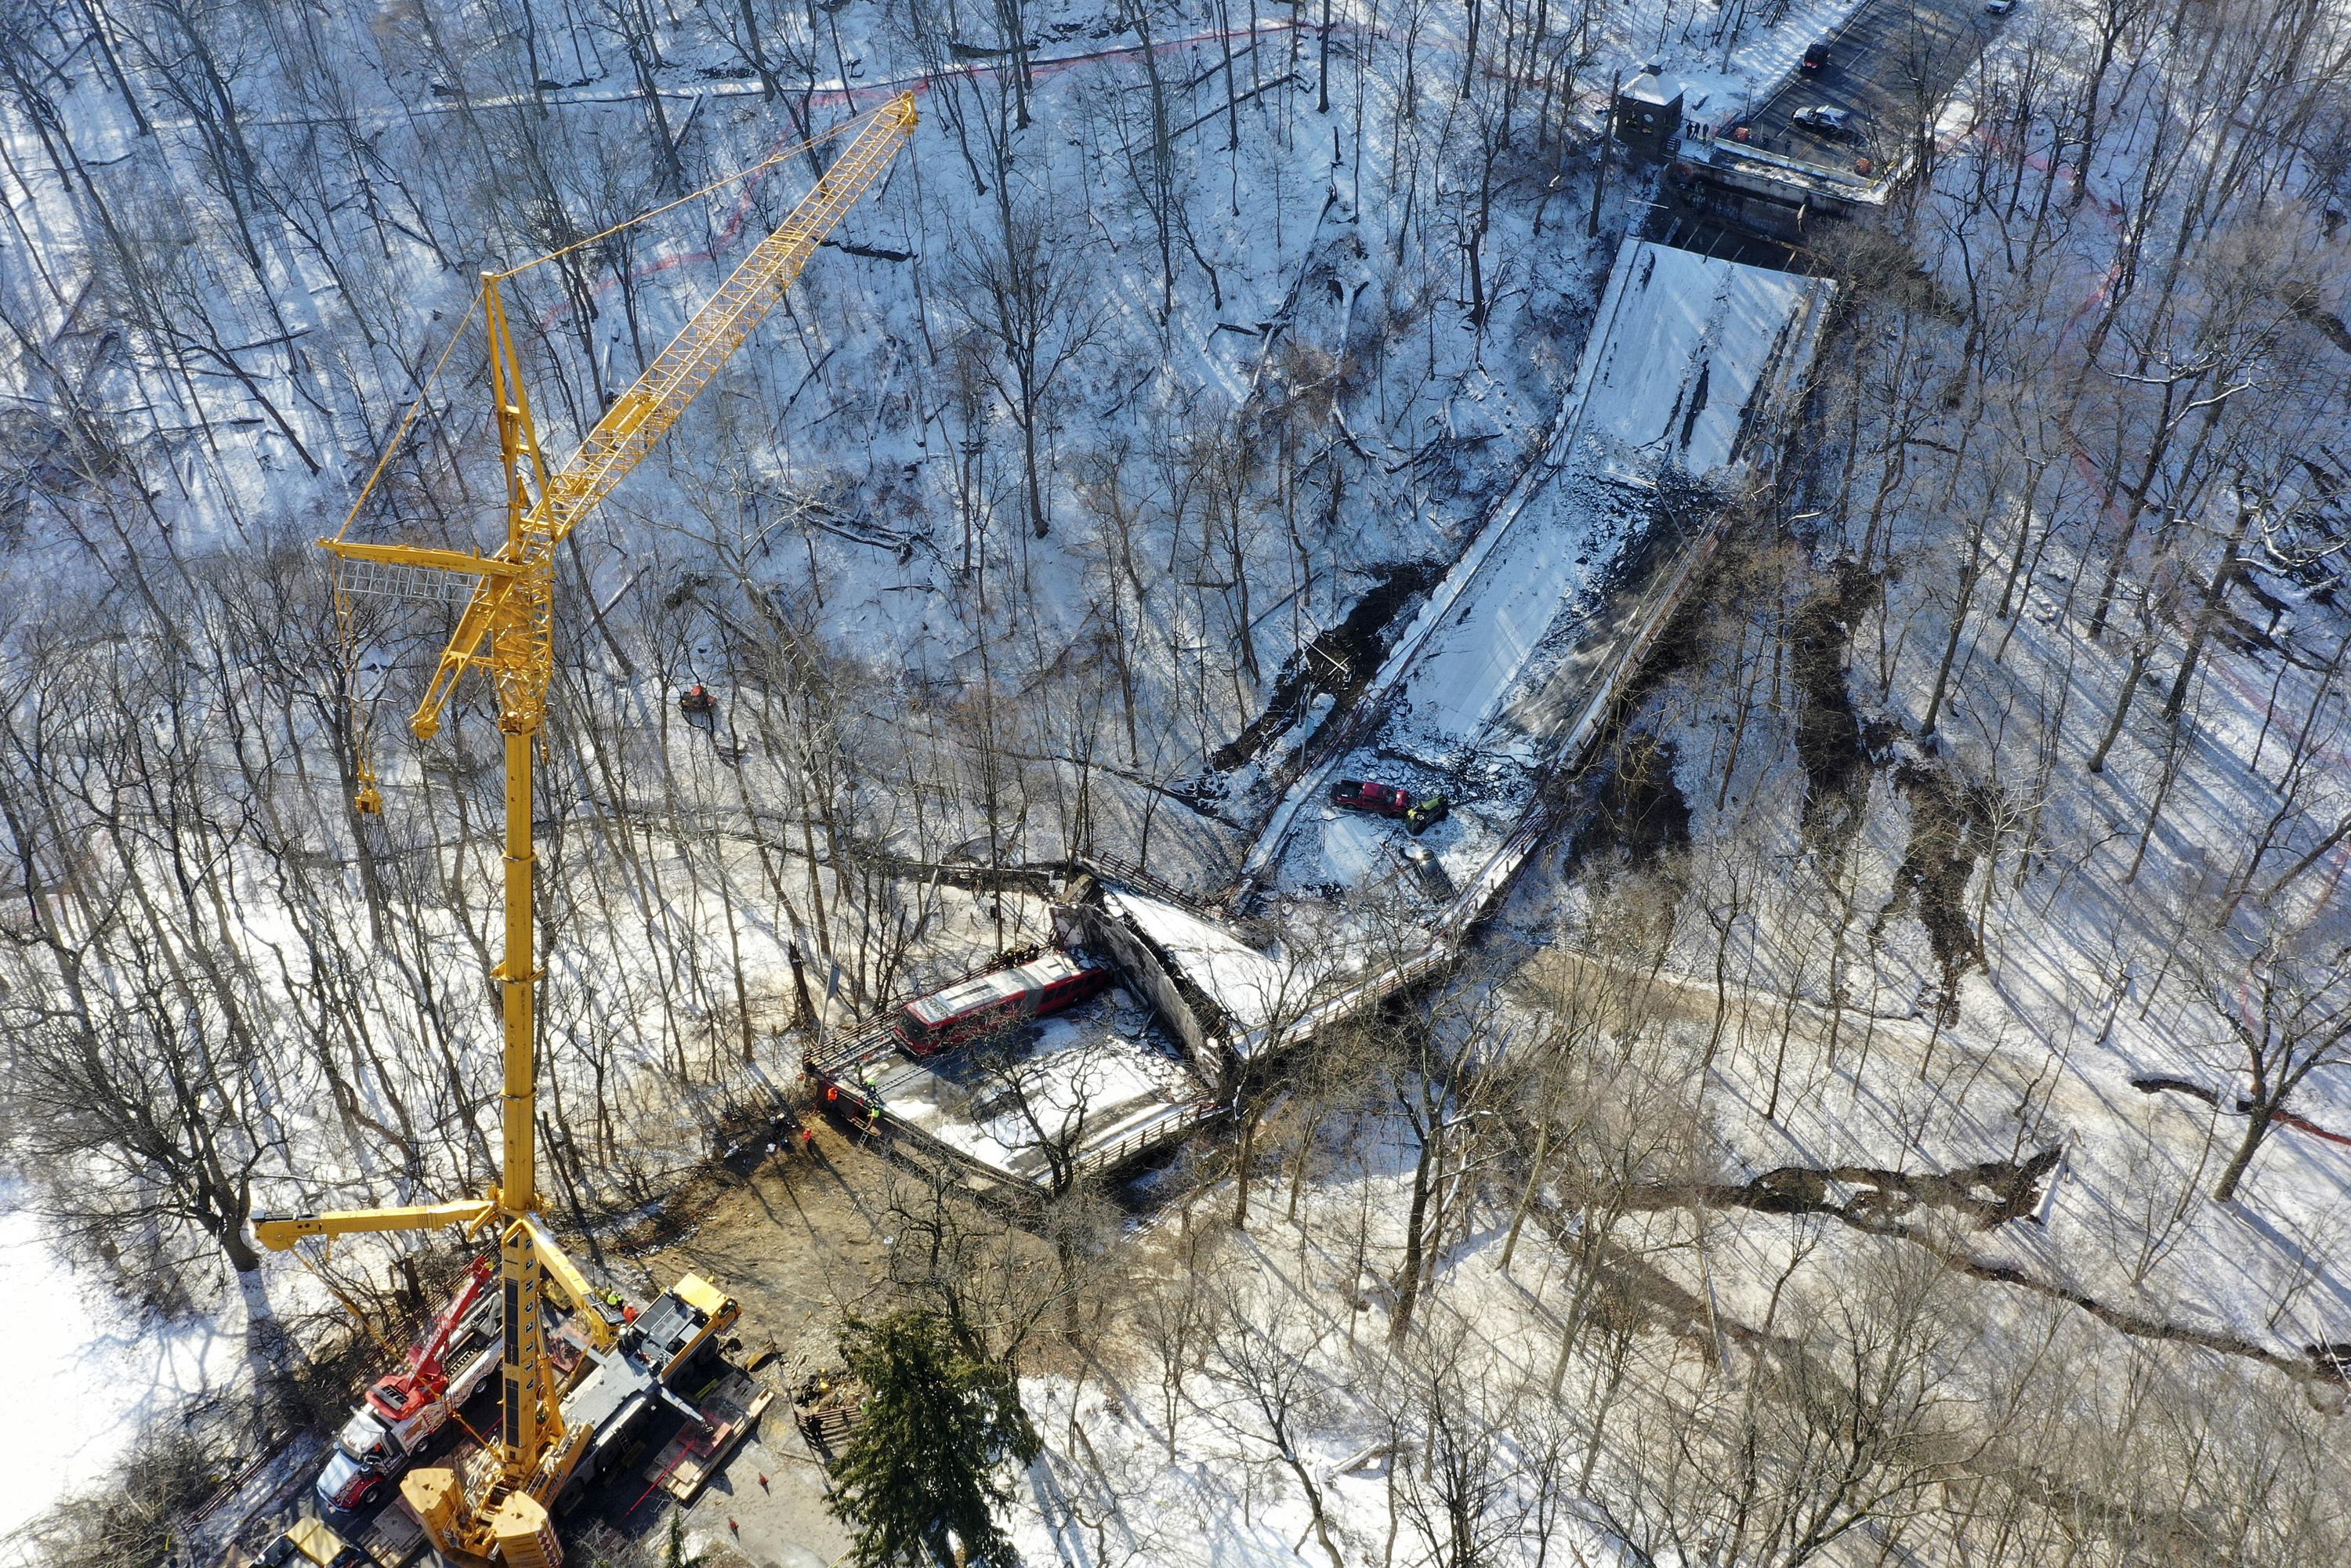 Study of Pittsburgh bridge collapse looking at leg fractures AP News